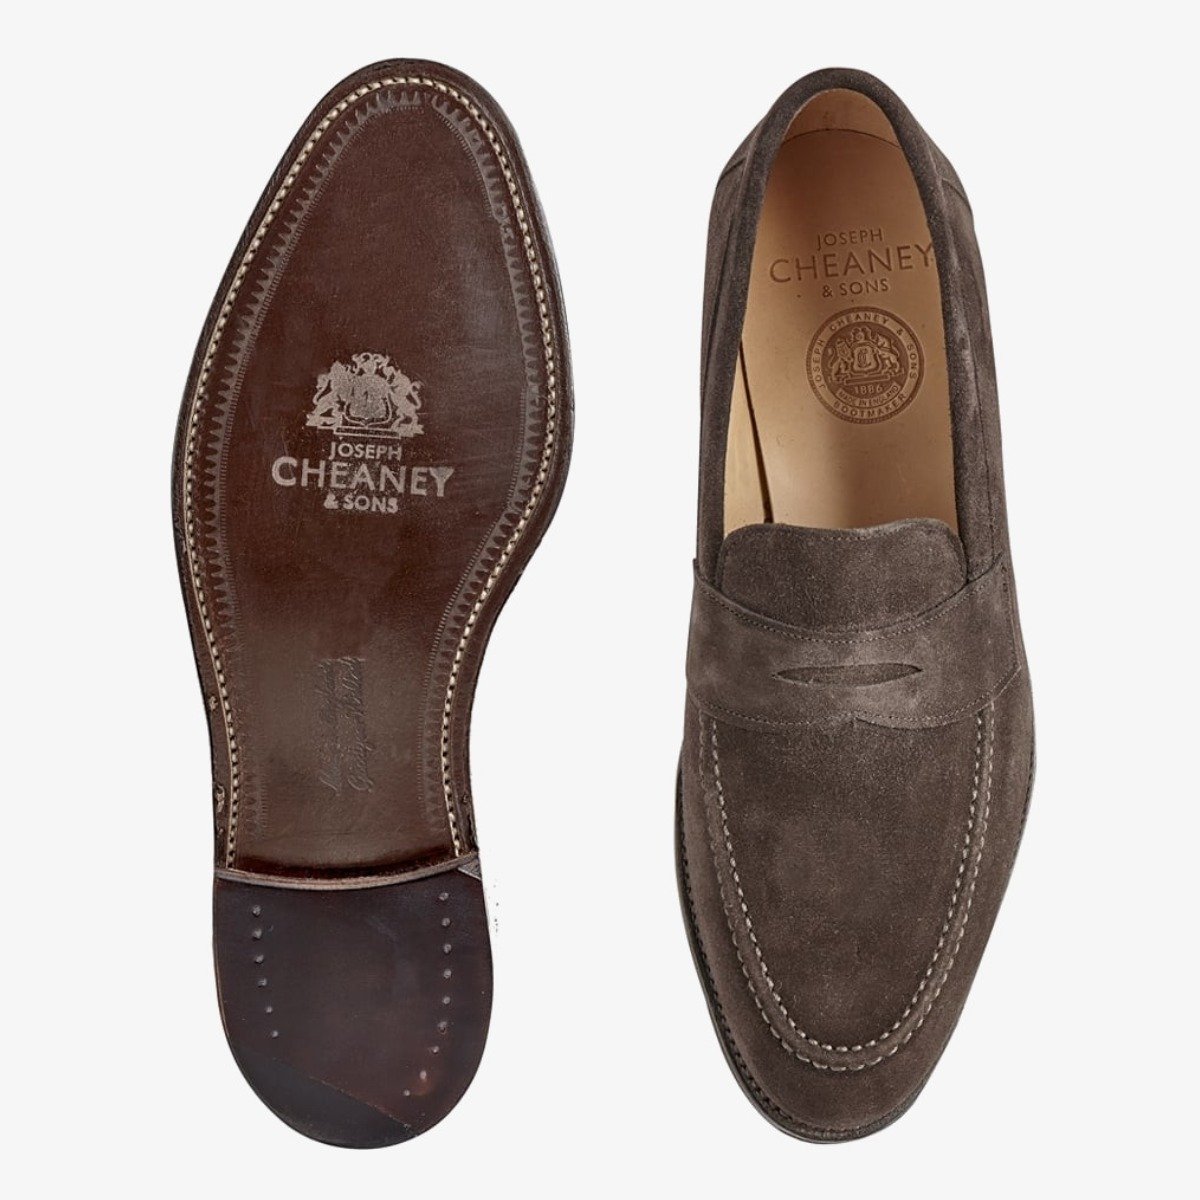 Cheaney Hadley brown suede men's penny loafers